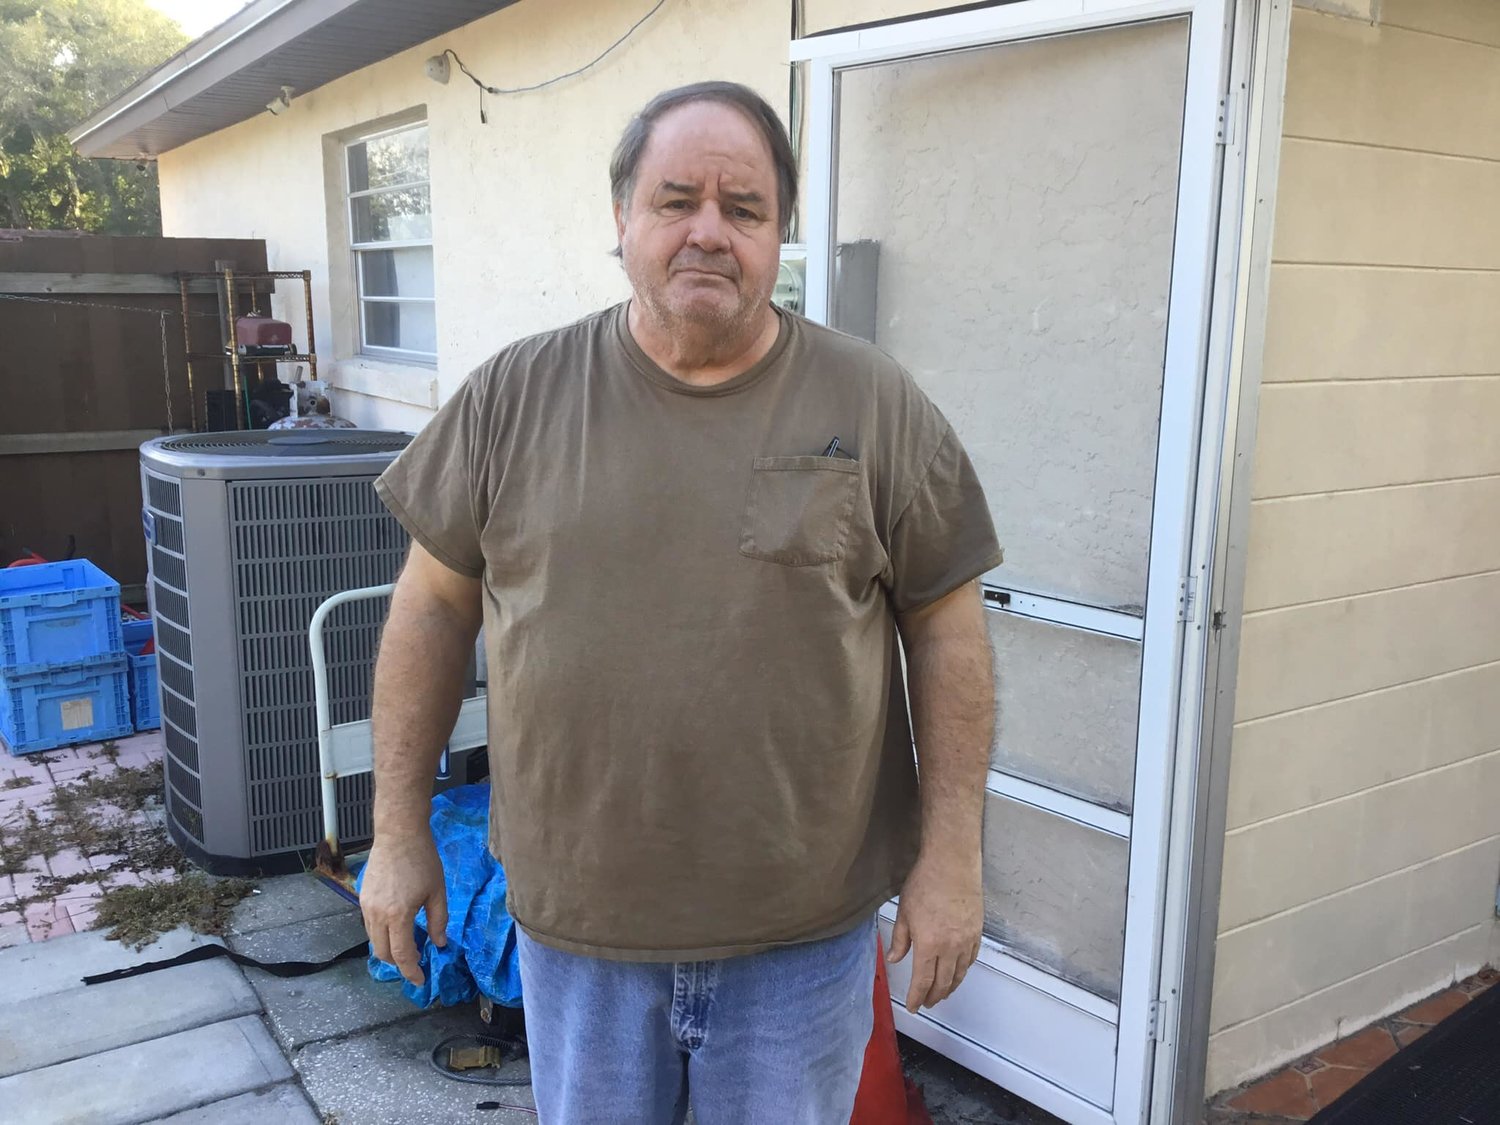 Longtime Apopka resident Dennis New is fighting code violations and foreclosure by the City.